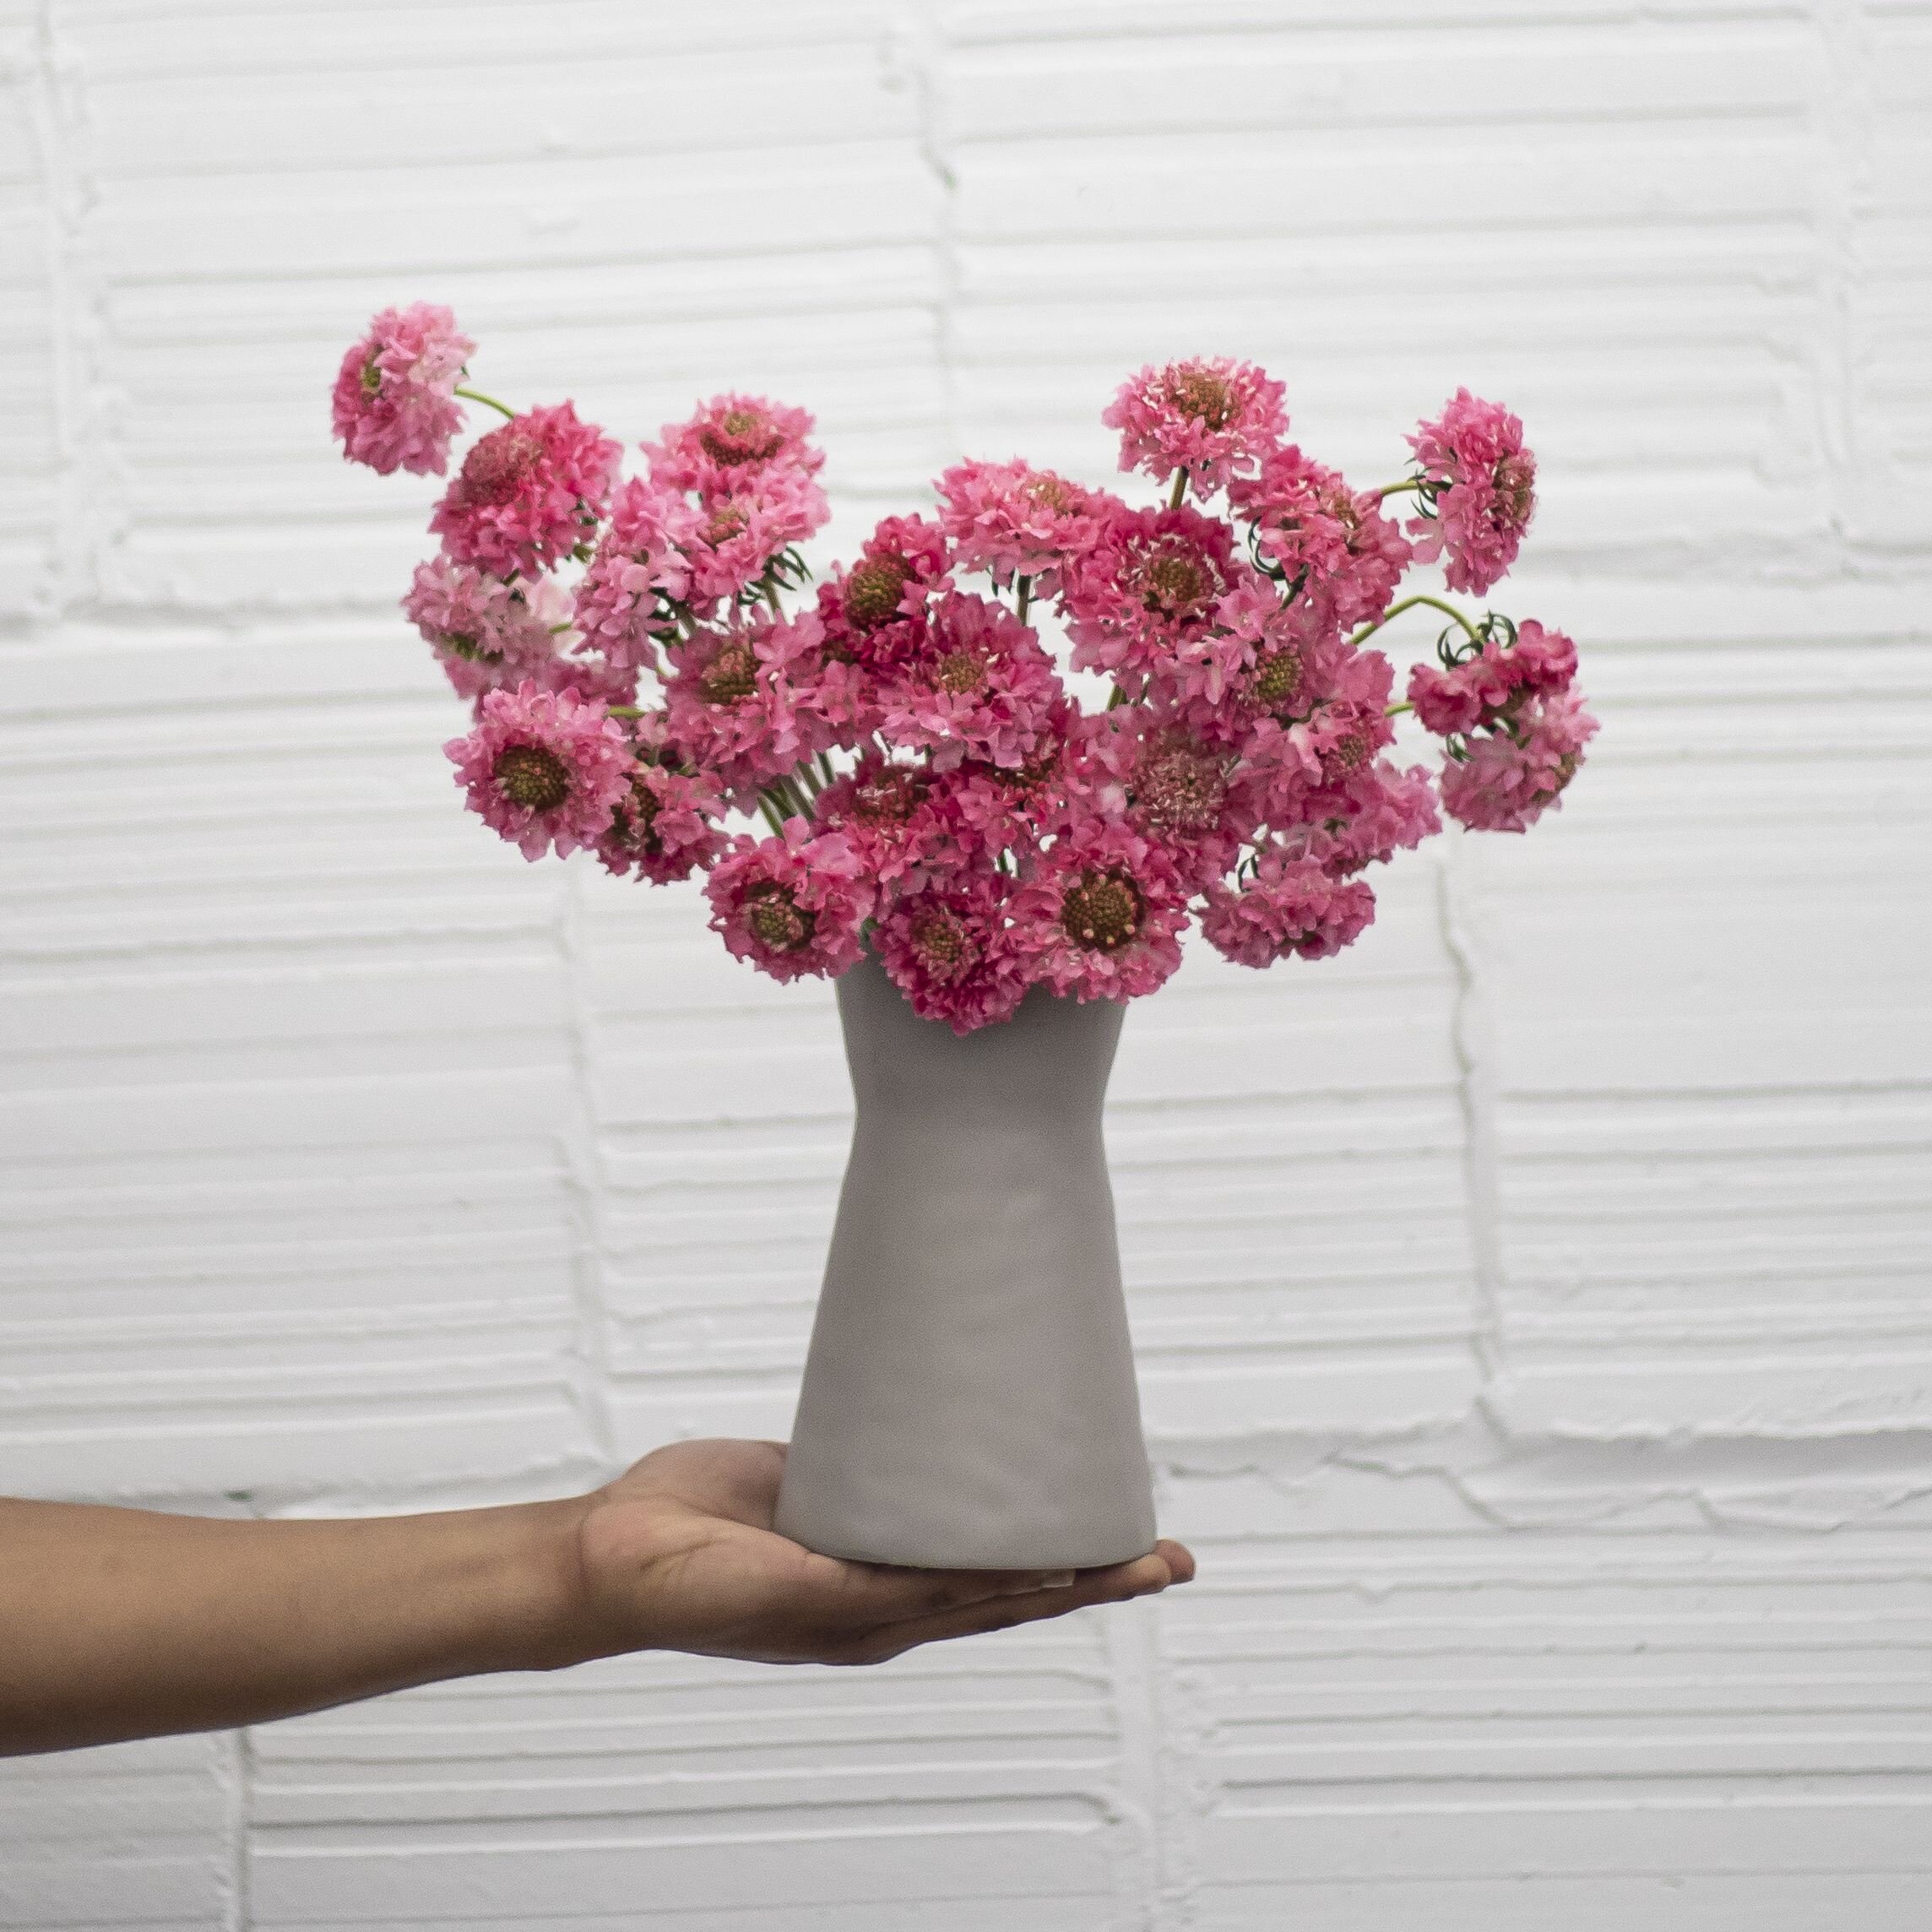 An arrangement of pink scabiosa flowers in a stone vase being held in front of a white wall